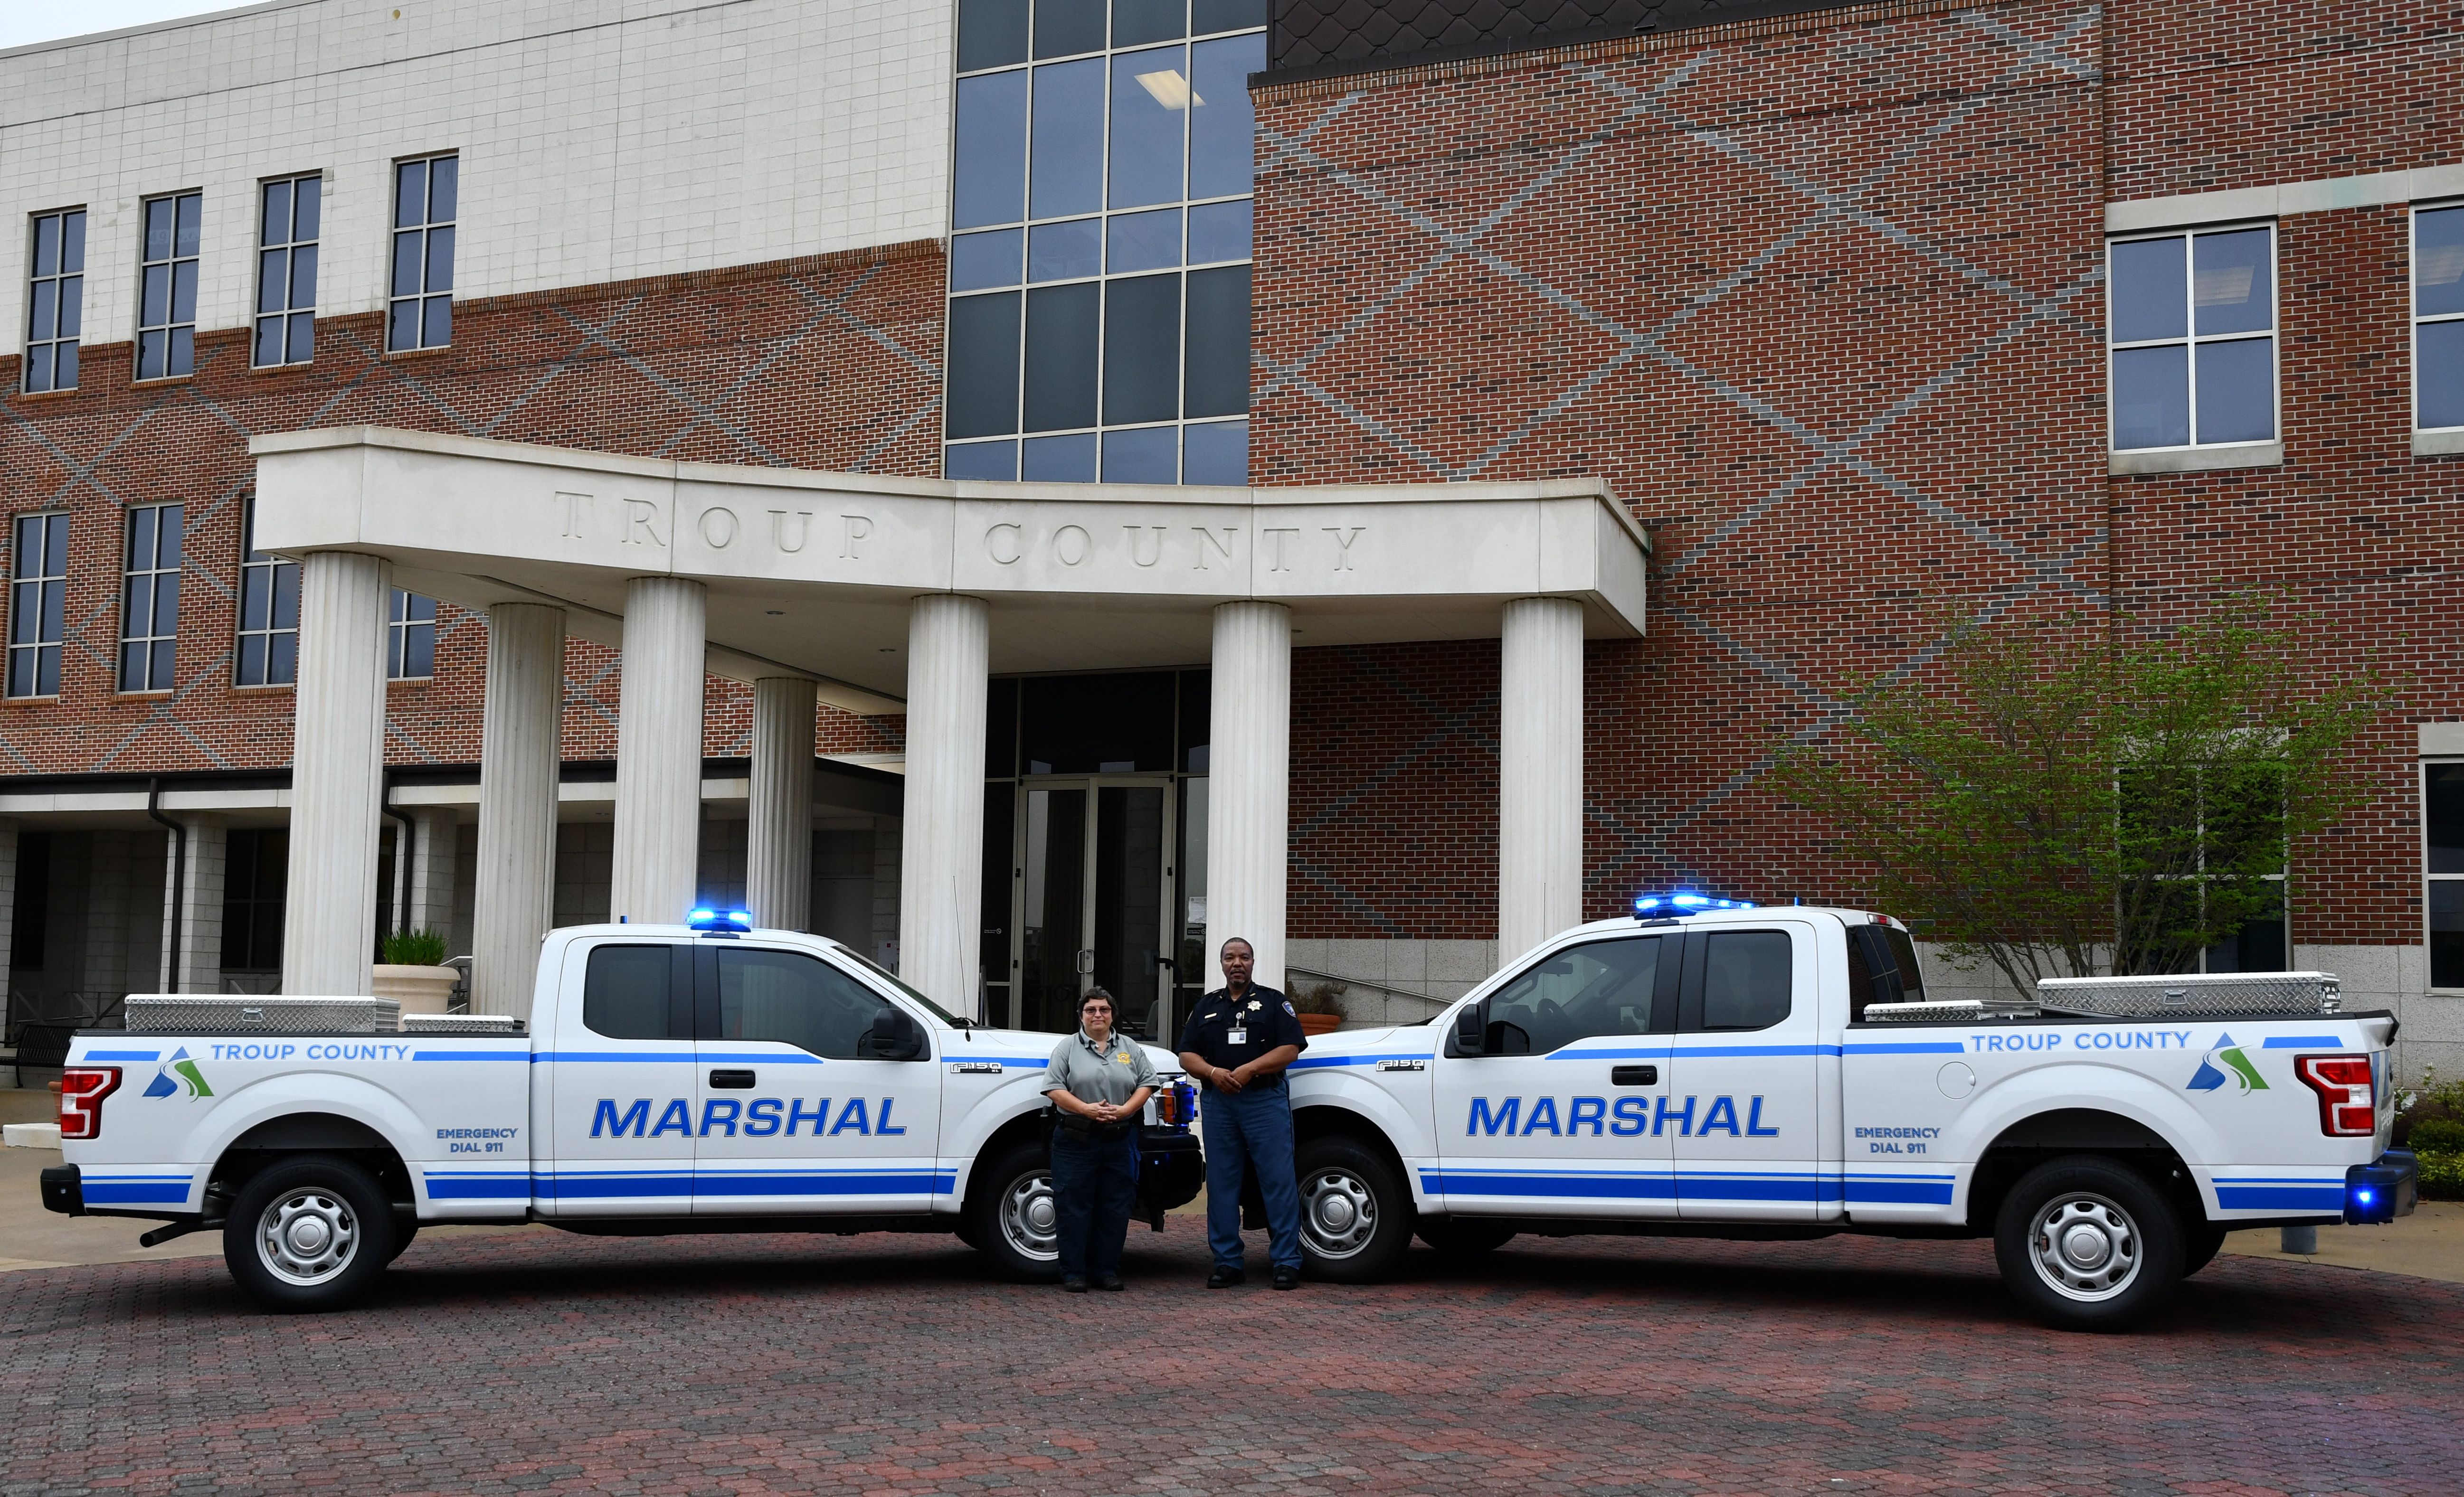 Marshal trucks in front of the Troup County Government center